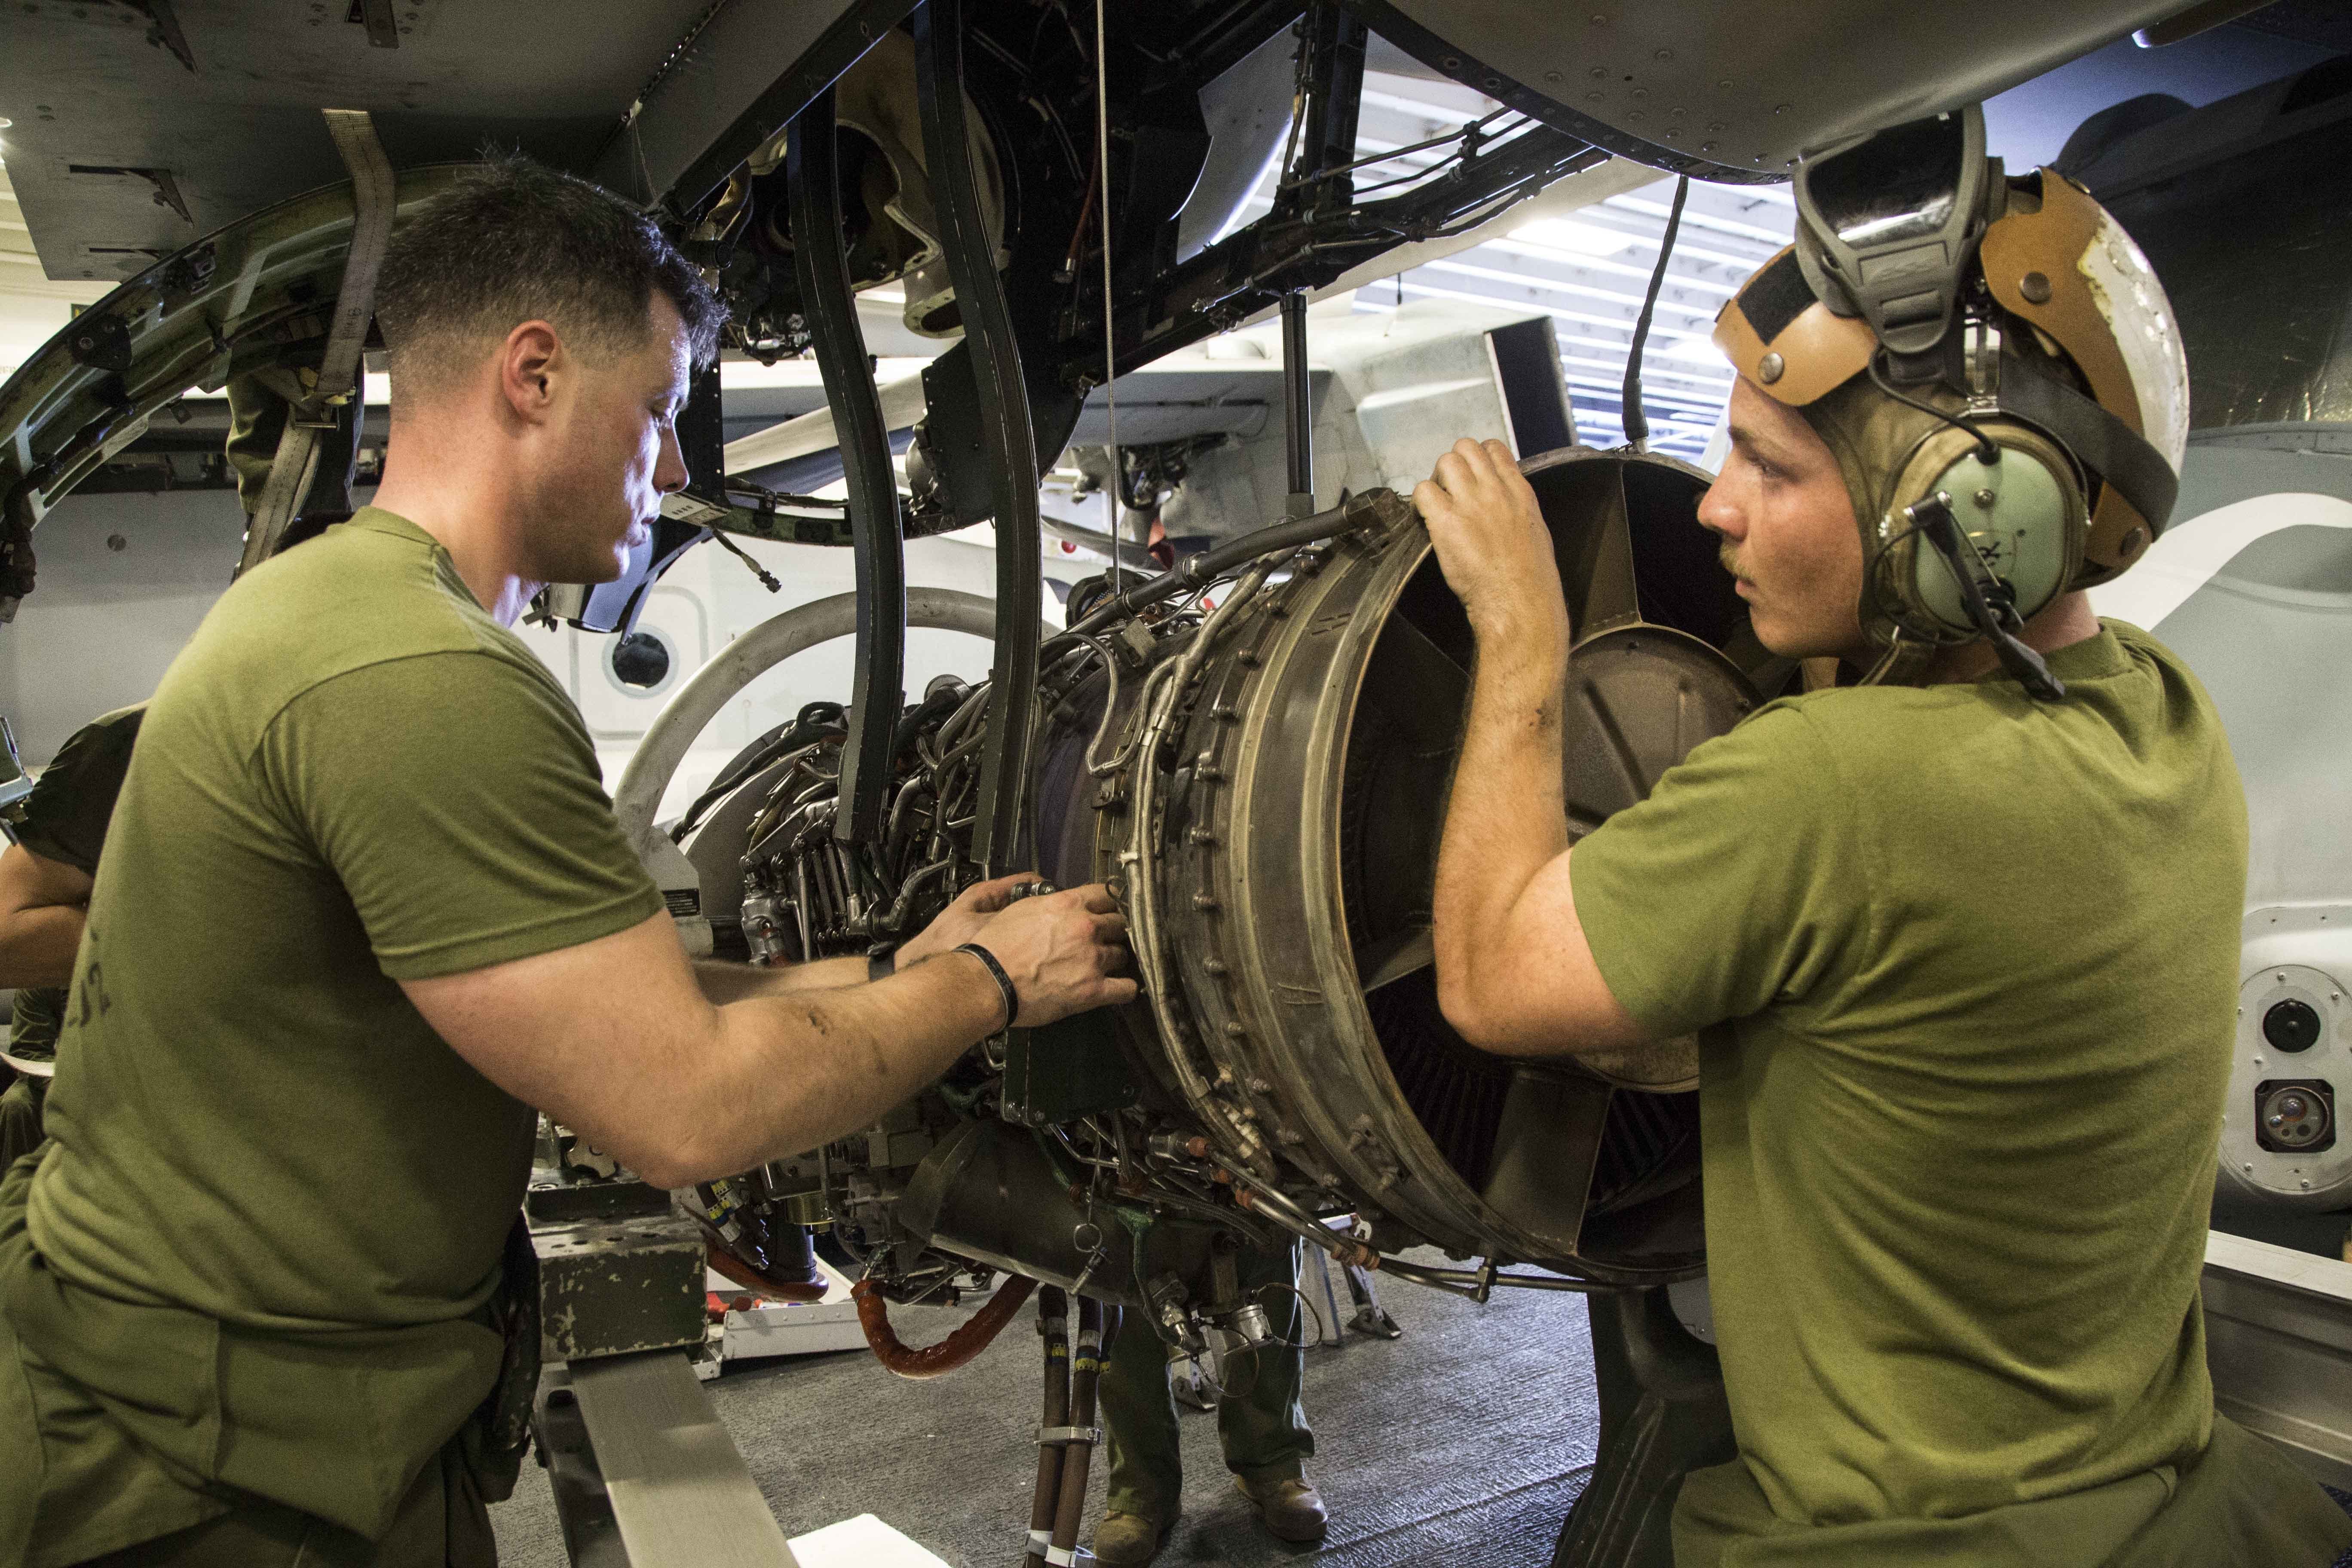 U.S. Marine Sgt. Ryan Boele (left), a MV-22 flight line mechanic chief with Marine Medium Tiltrotor Squadron 163 (Reinforced), 11th Marine Expeditionary Unit, and Lance Cpl. David Bath (right), a MV-22 flight line mechanic with VMM-163, 11th MEU, adjust cables on an engine of an MV-22 Osprey within the hanger bay of the USS Makin Island (LHD 8) Dec. 27. US Marine Corps photo.